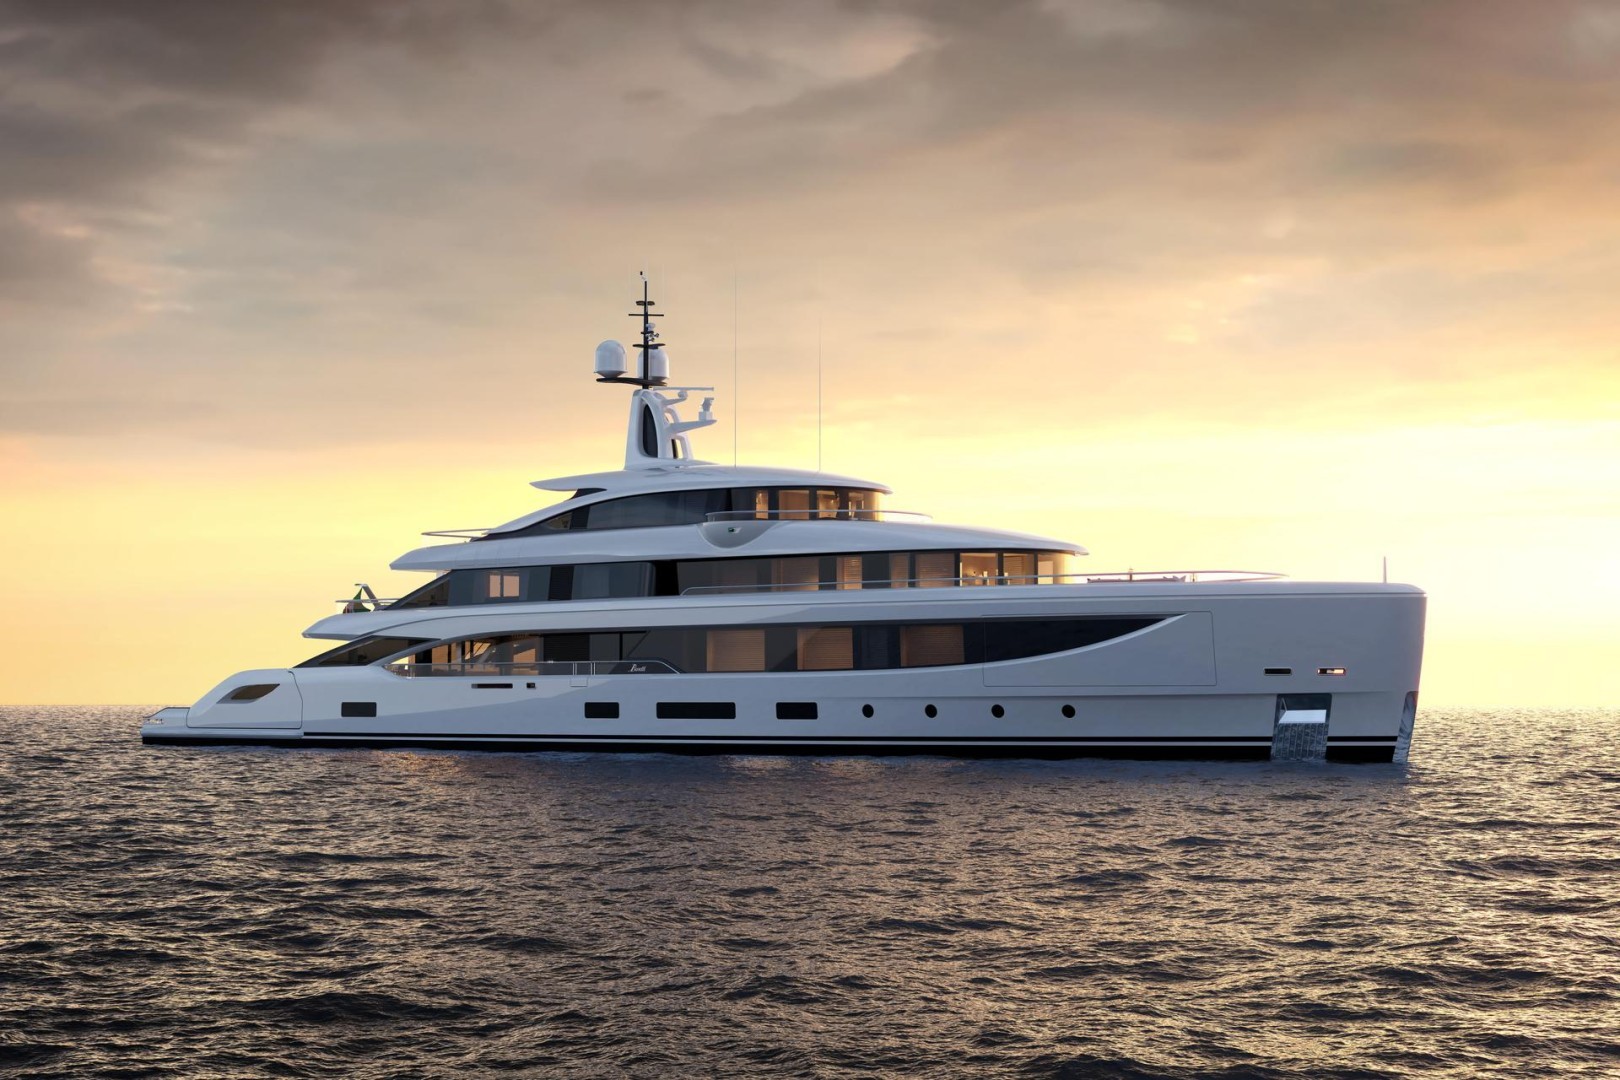 Benetti presents the new B.NOW designs, the evolution of the B.CENTURY family